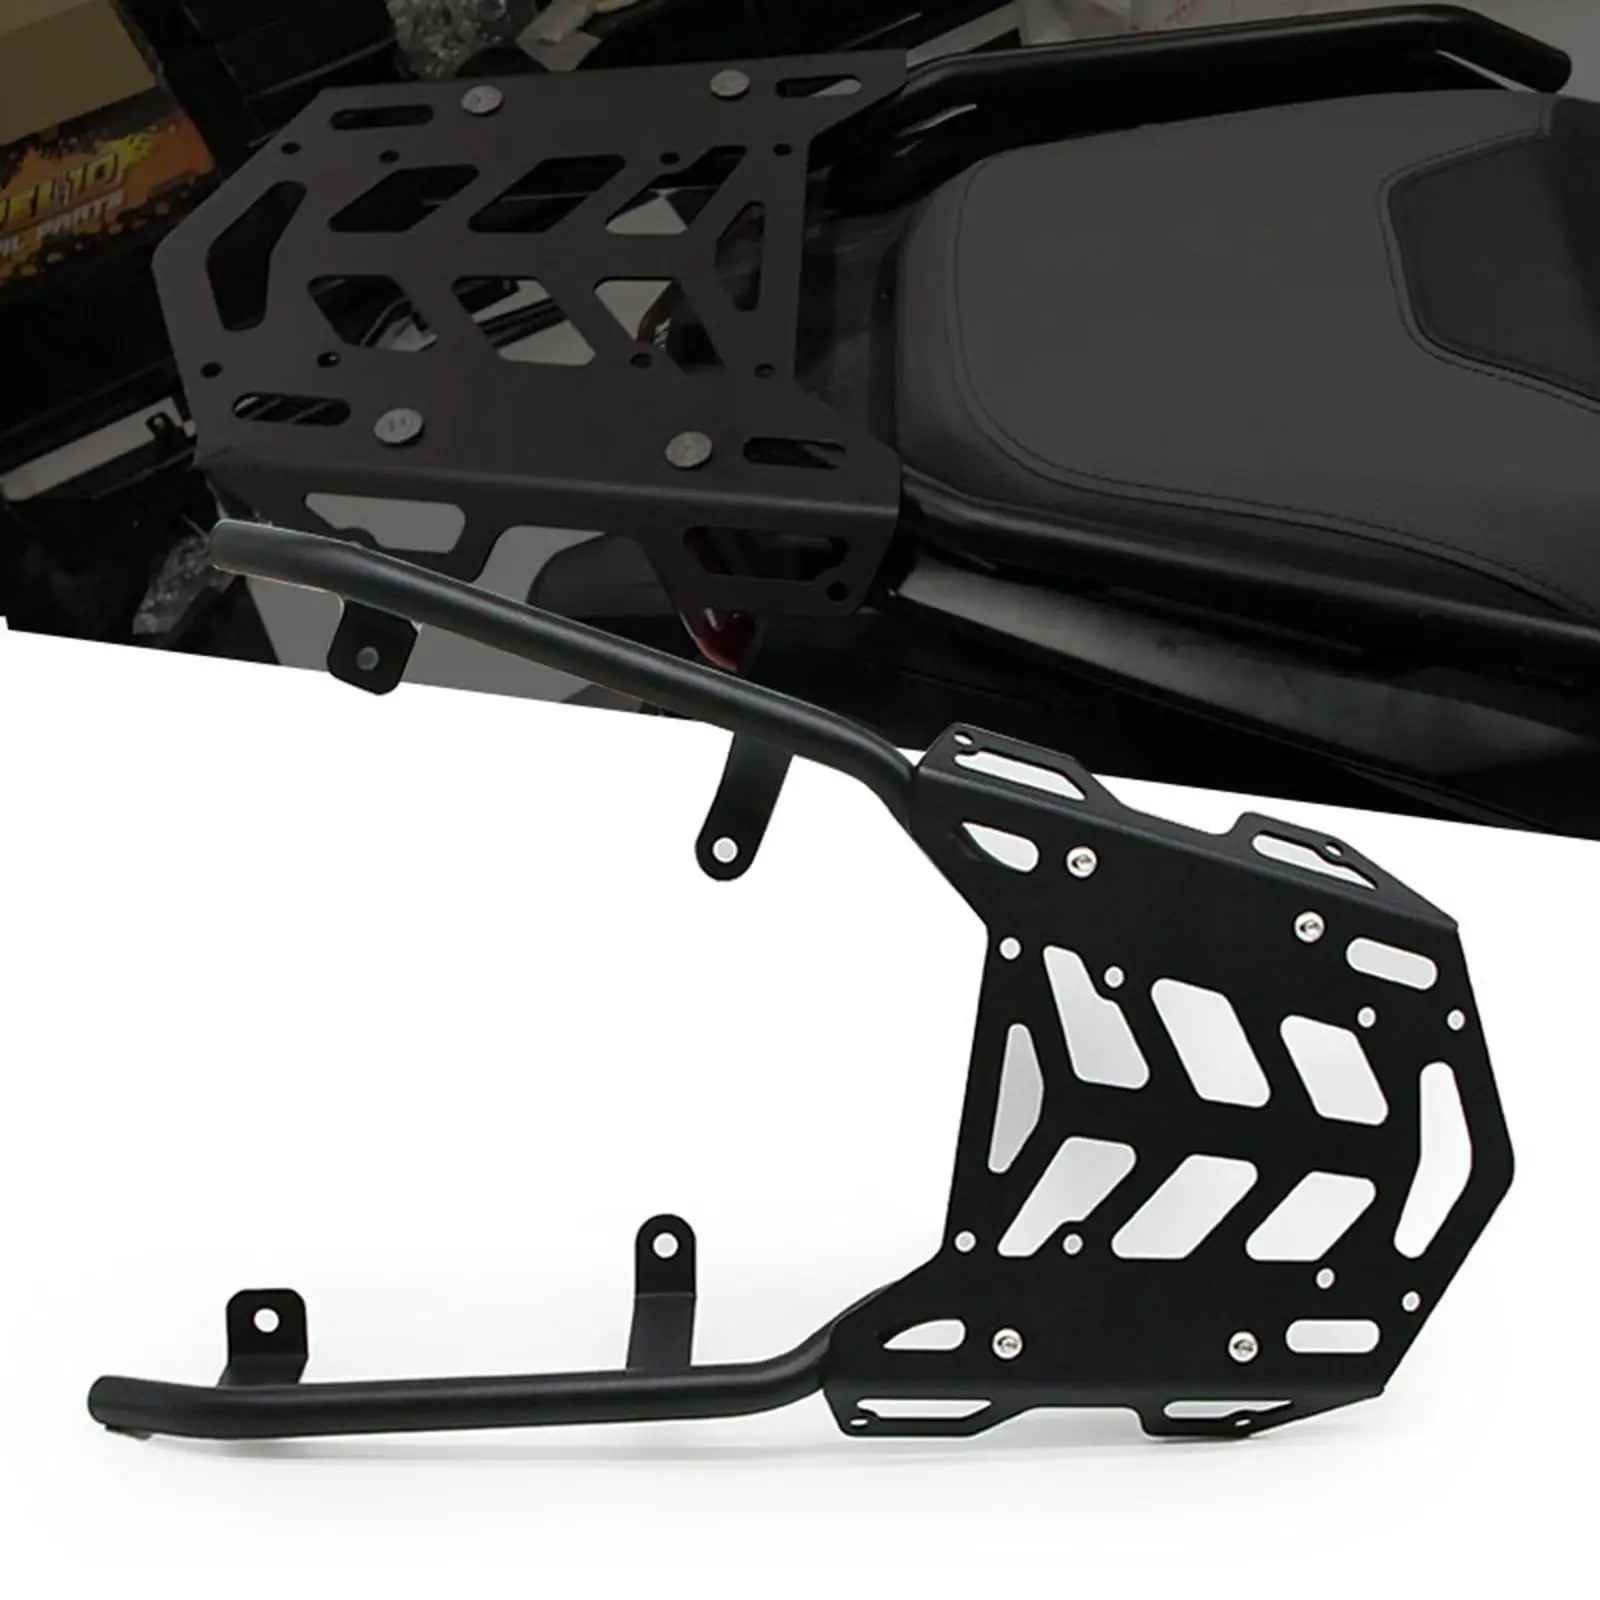 Motorcycle Rear Luggage Rack Fit for 19-21 Easy Install Parts